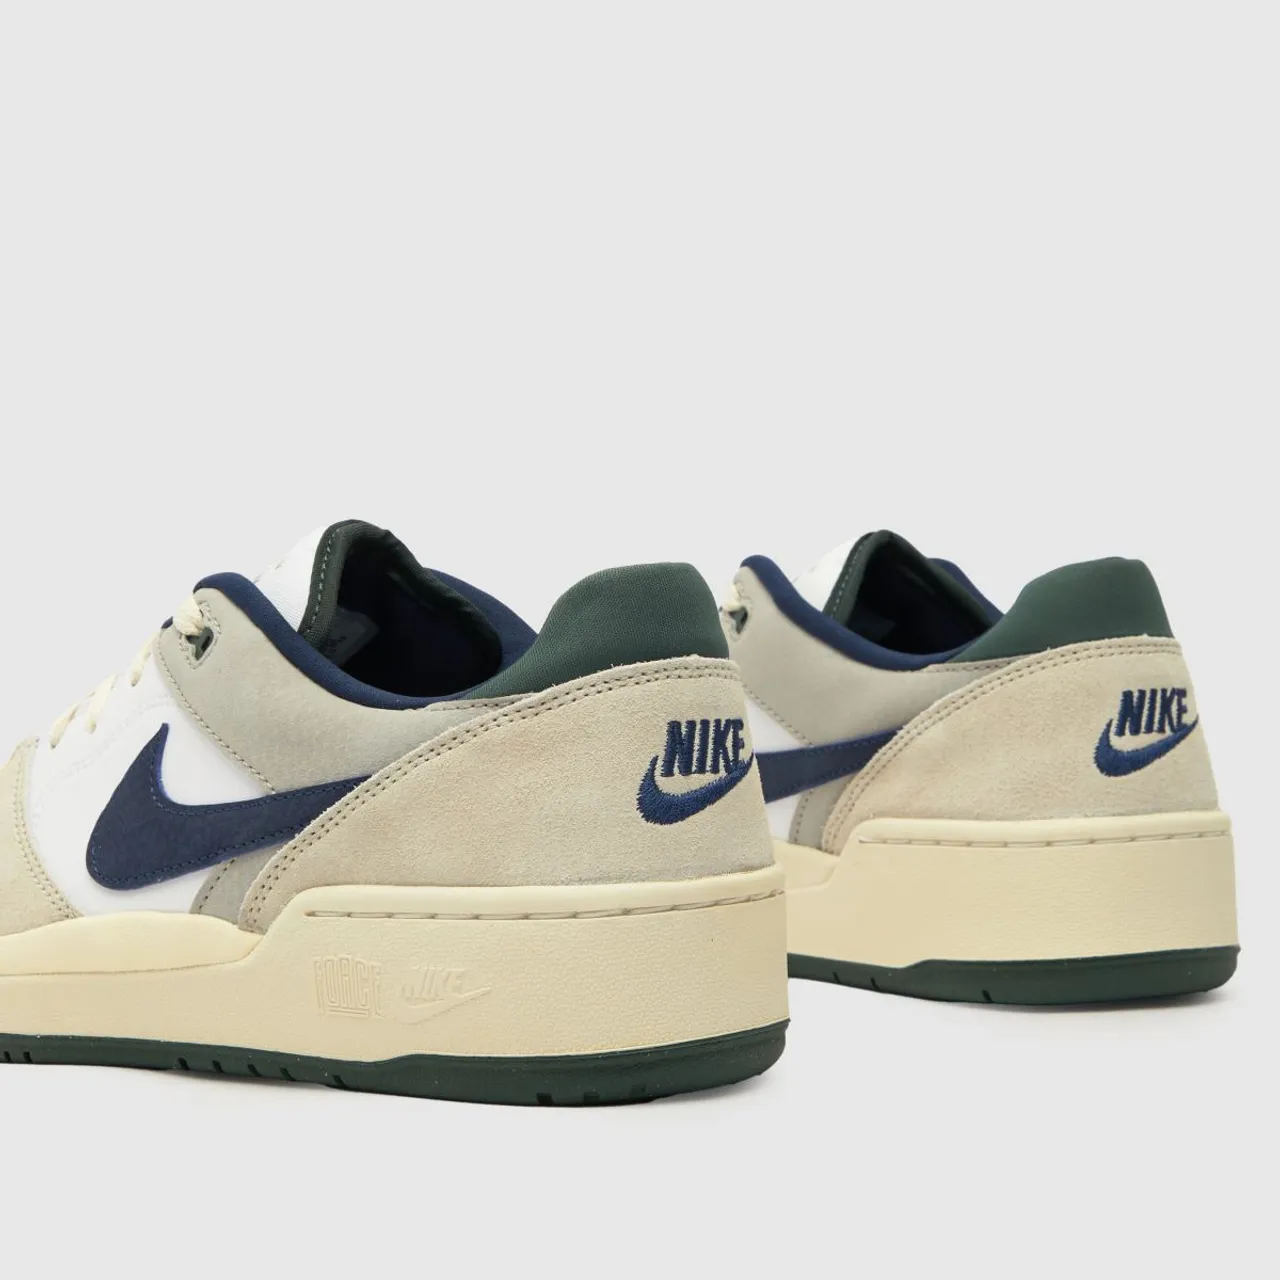 Nike Full Force lo Trainers in White & Navy